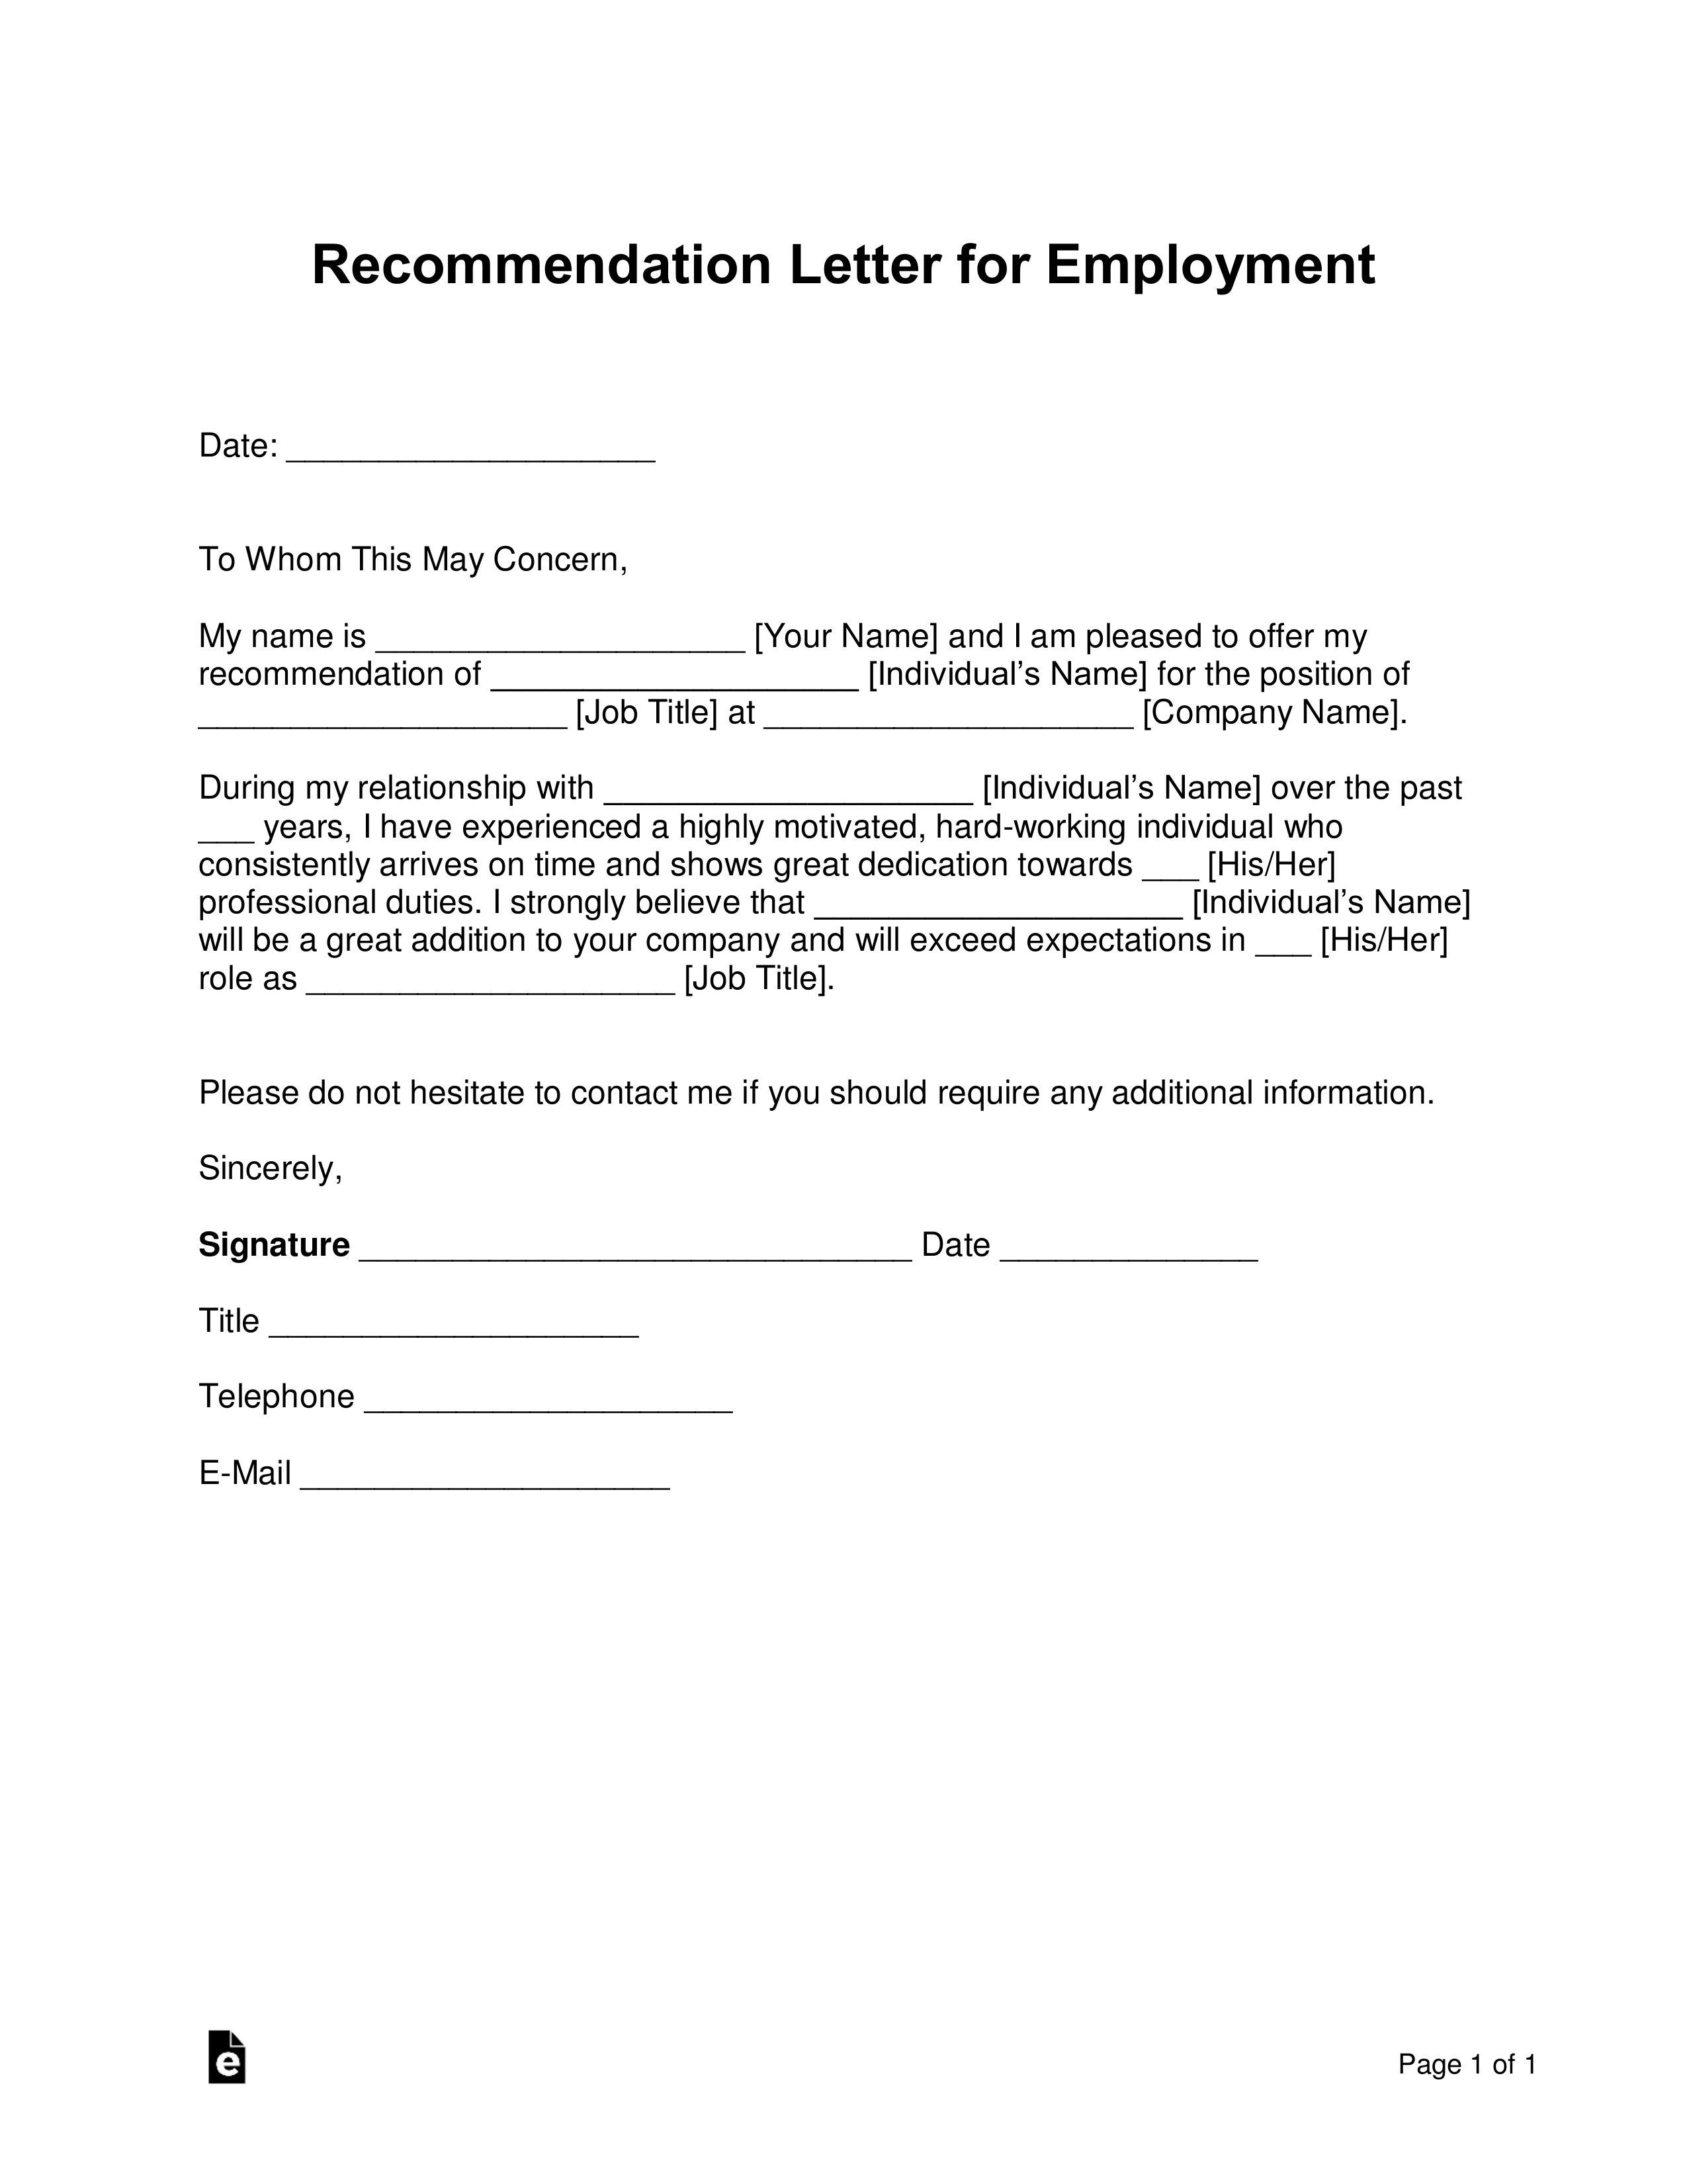 Employee Reference Letter Example from eforms.com